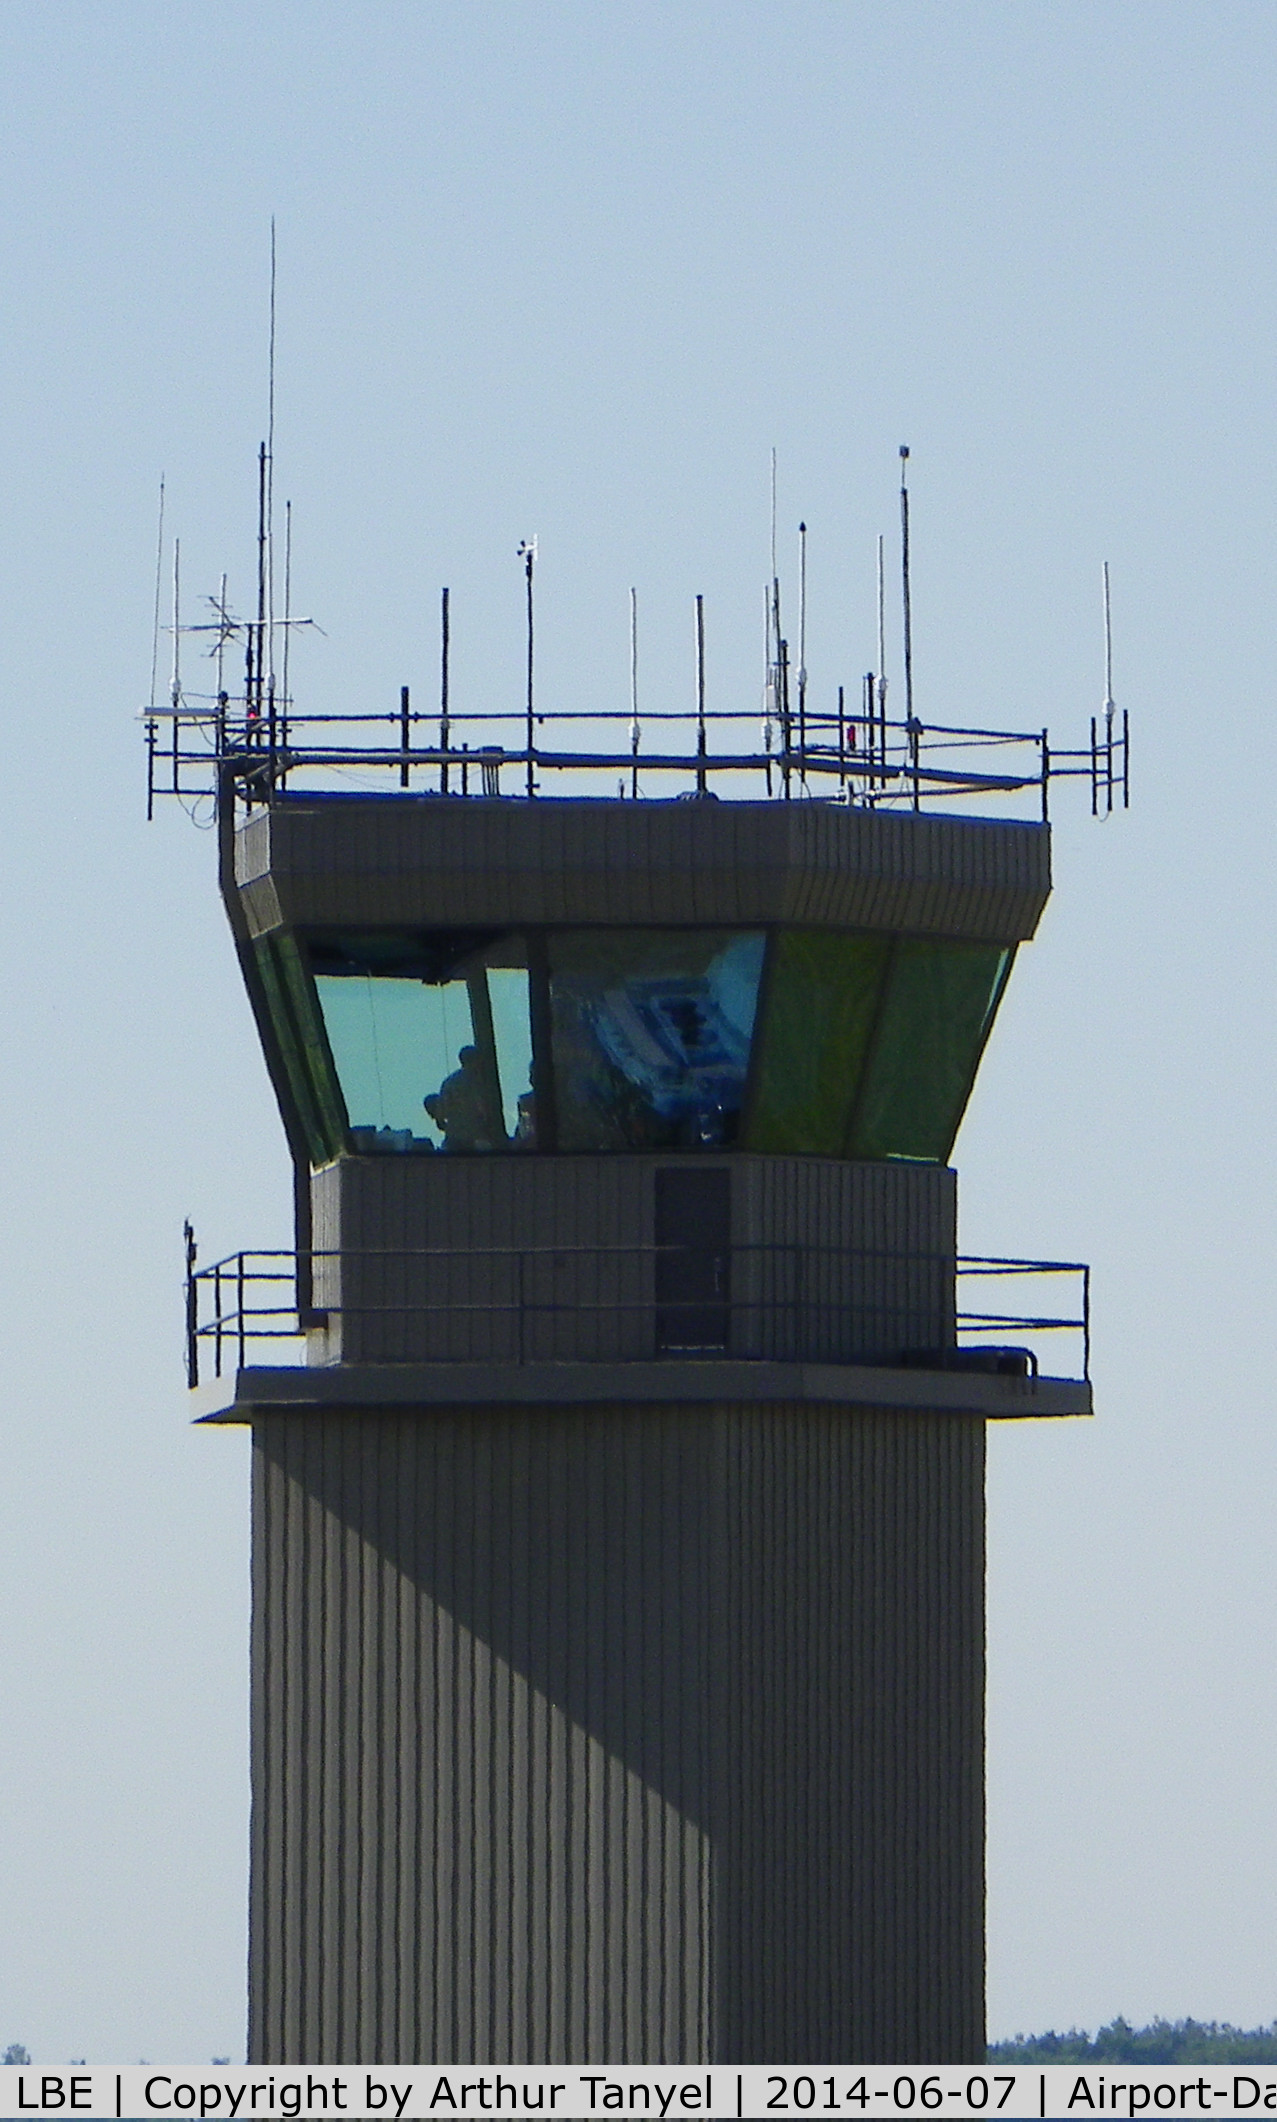 Arnold Palmer Regional Airport (LBE) - Control tower